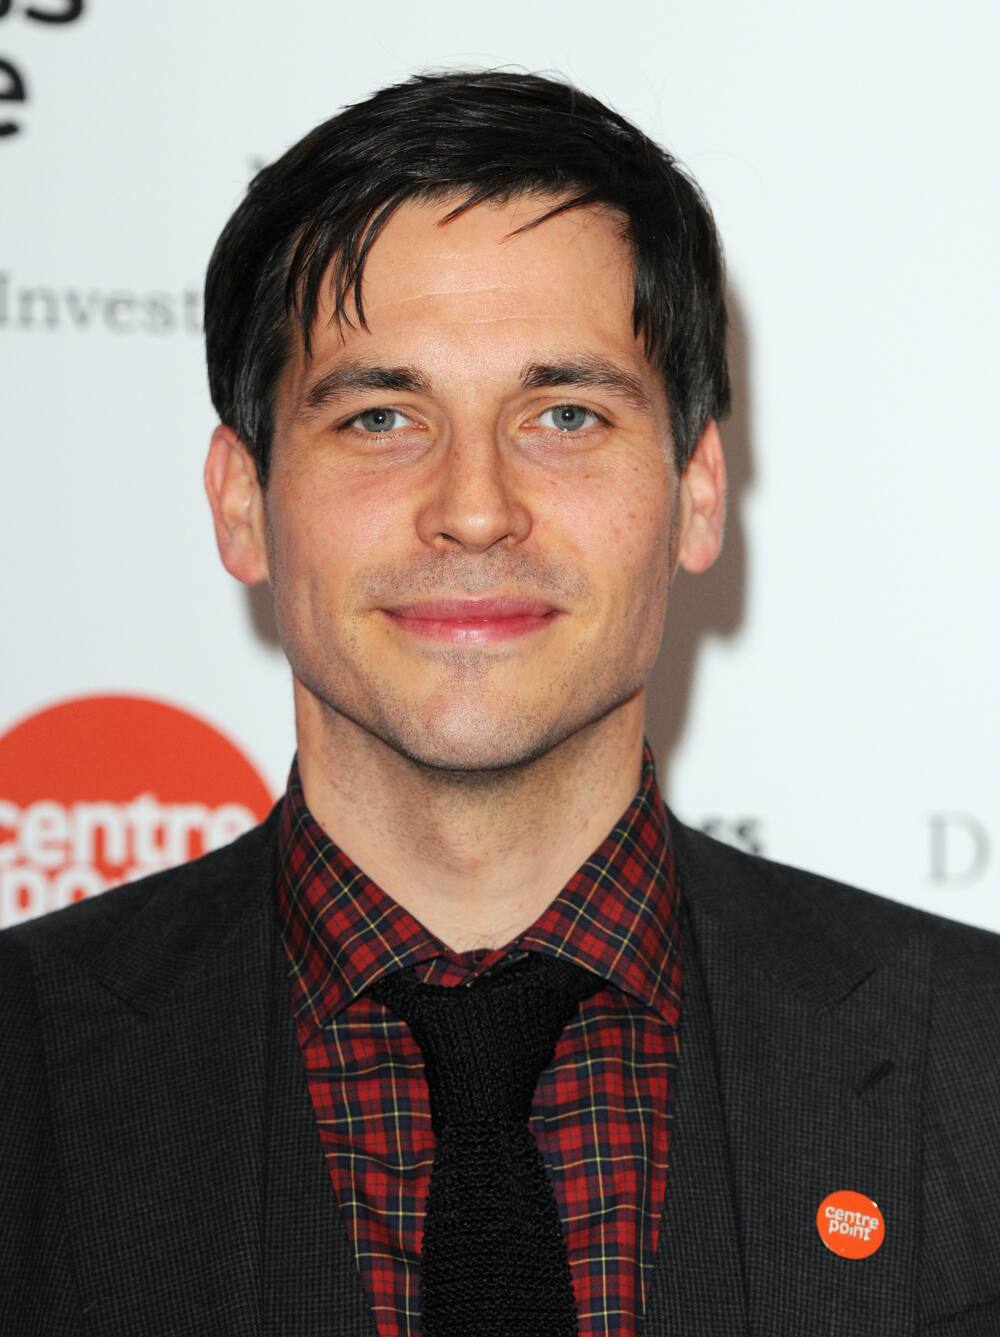 Who is Robert James-Collier’s wife?